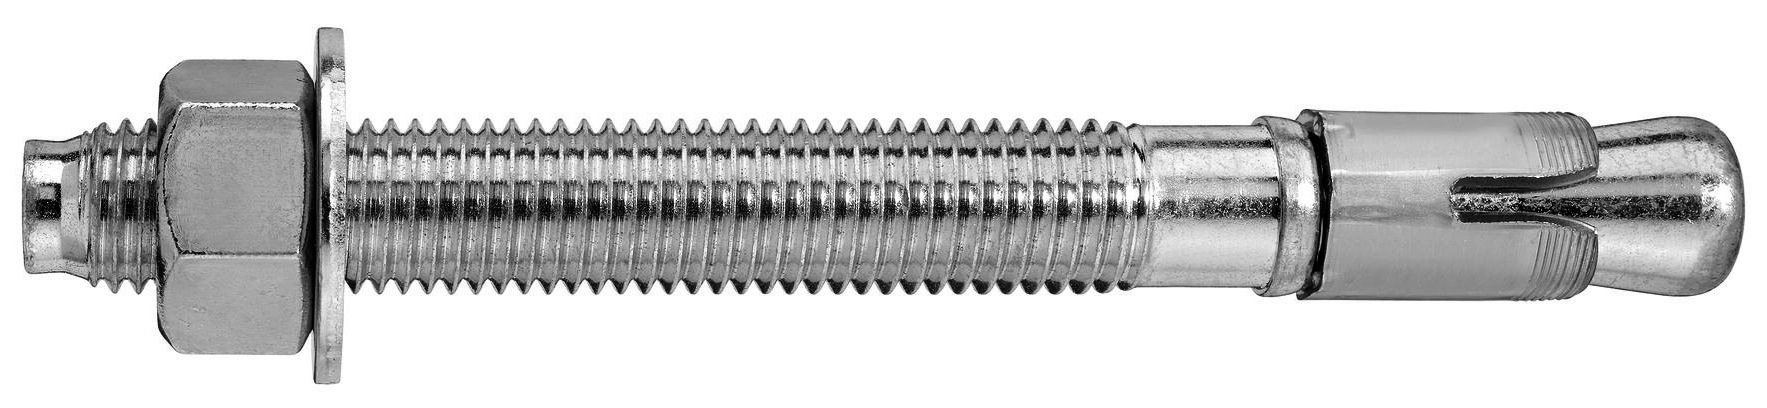 CBU Expansive Wedge Anchor Bolt Kit – to Connect Pedestal Stand to Existing Concrete (4 Bolts) Product Image